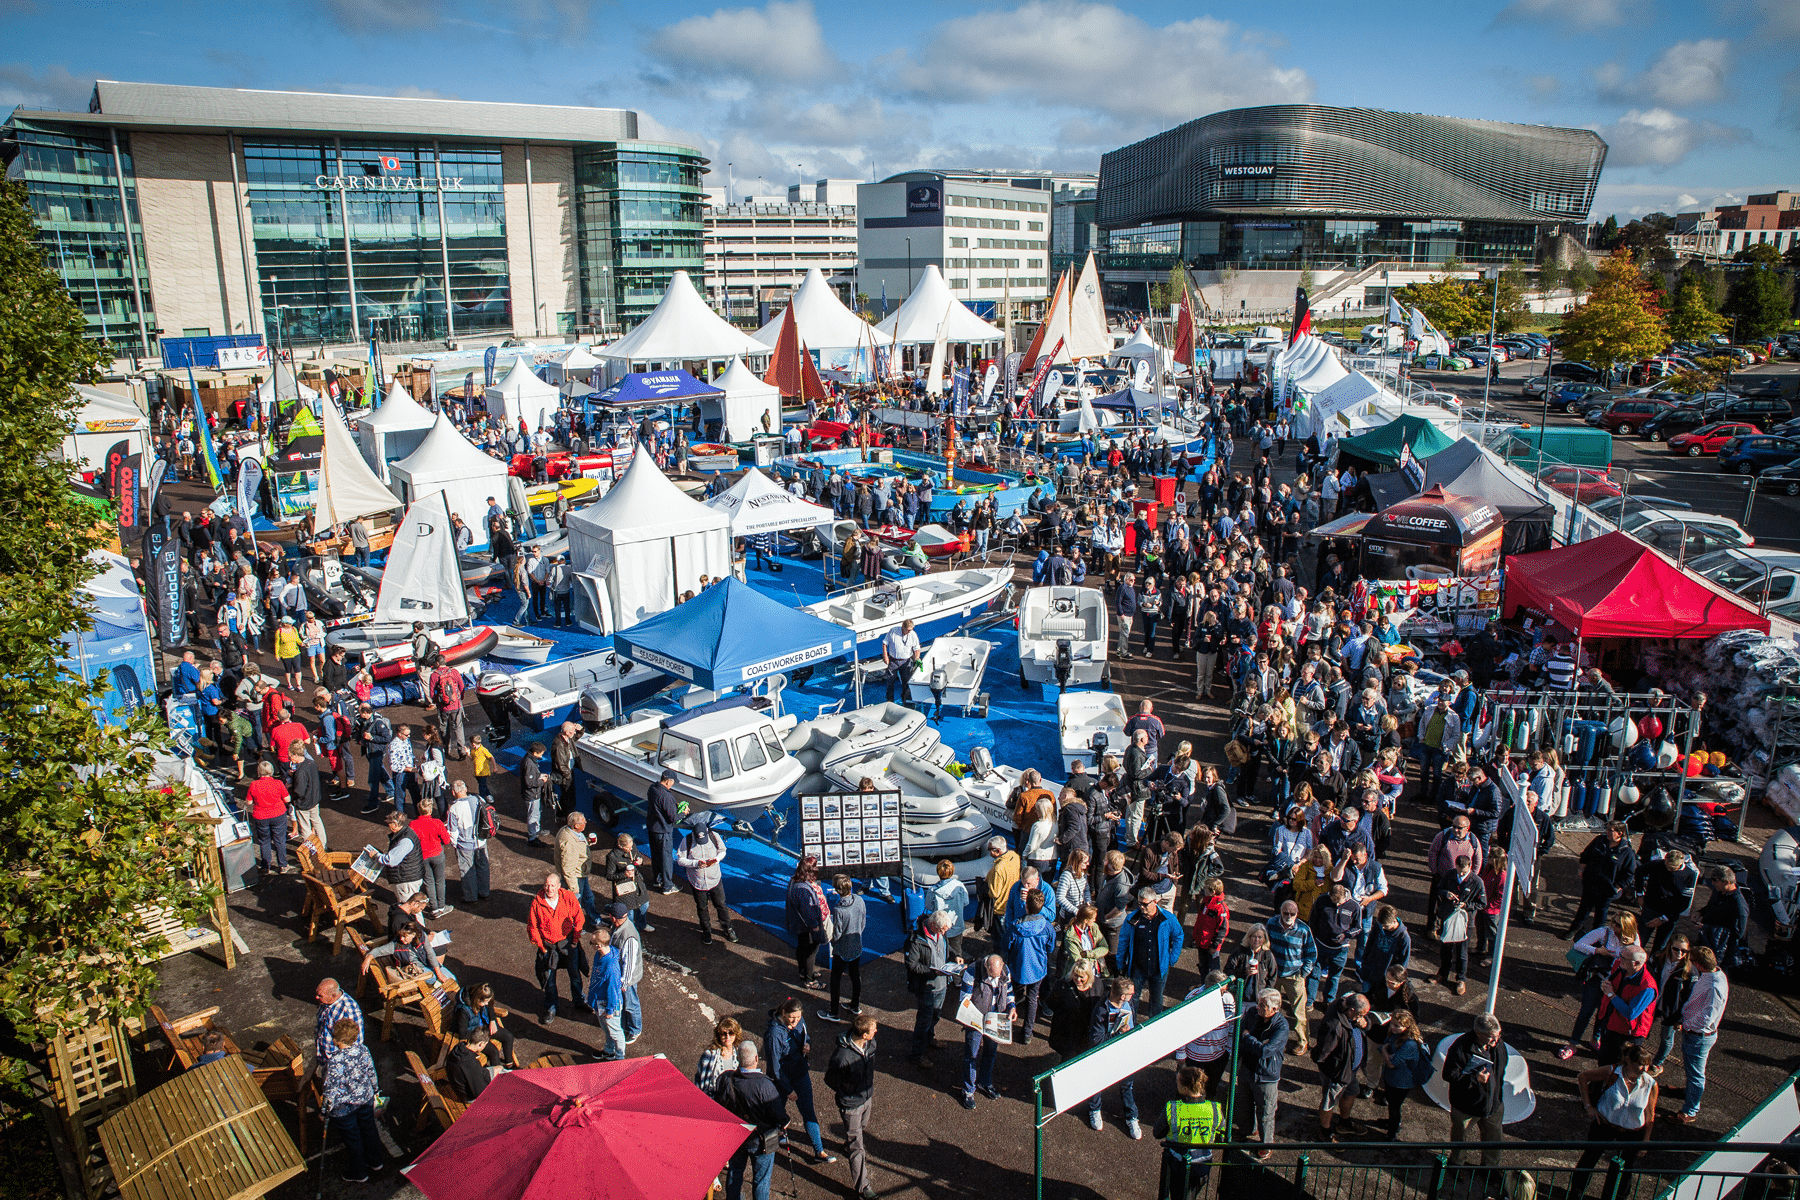 Gangways, Lights, Wempe and *something new* at the Southampton Boat Show 2017